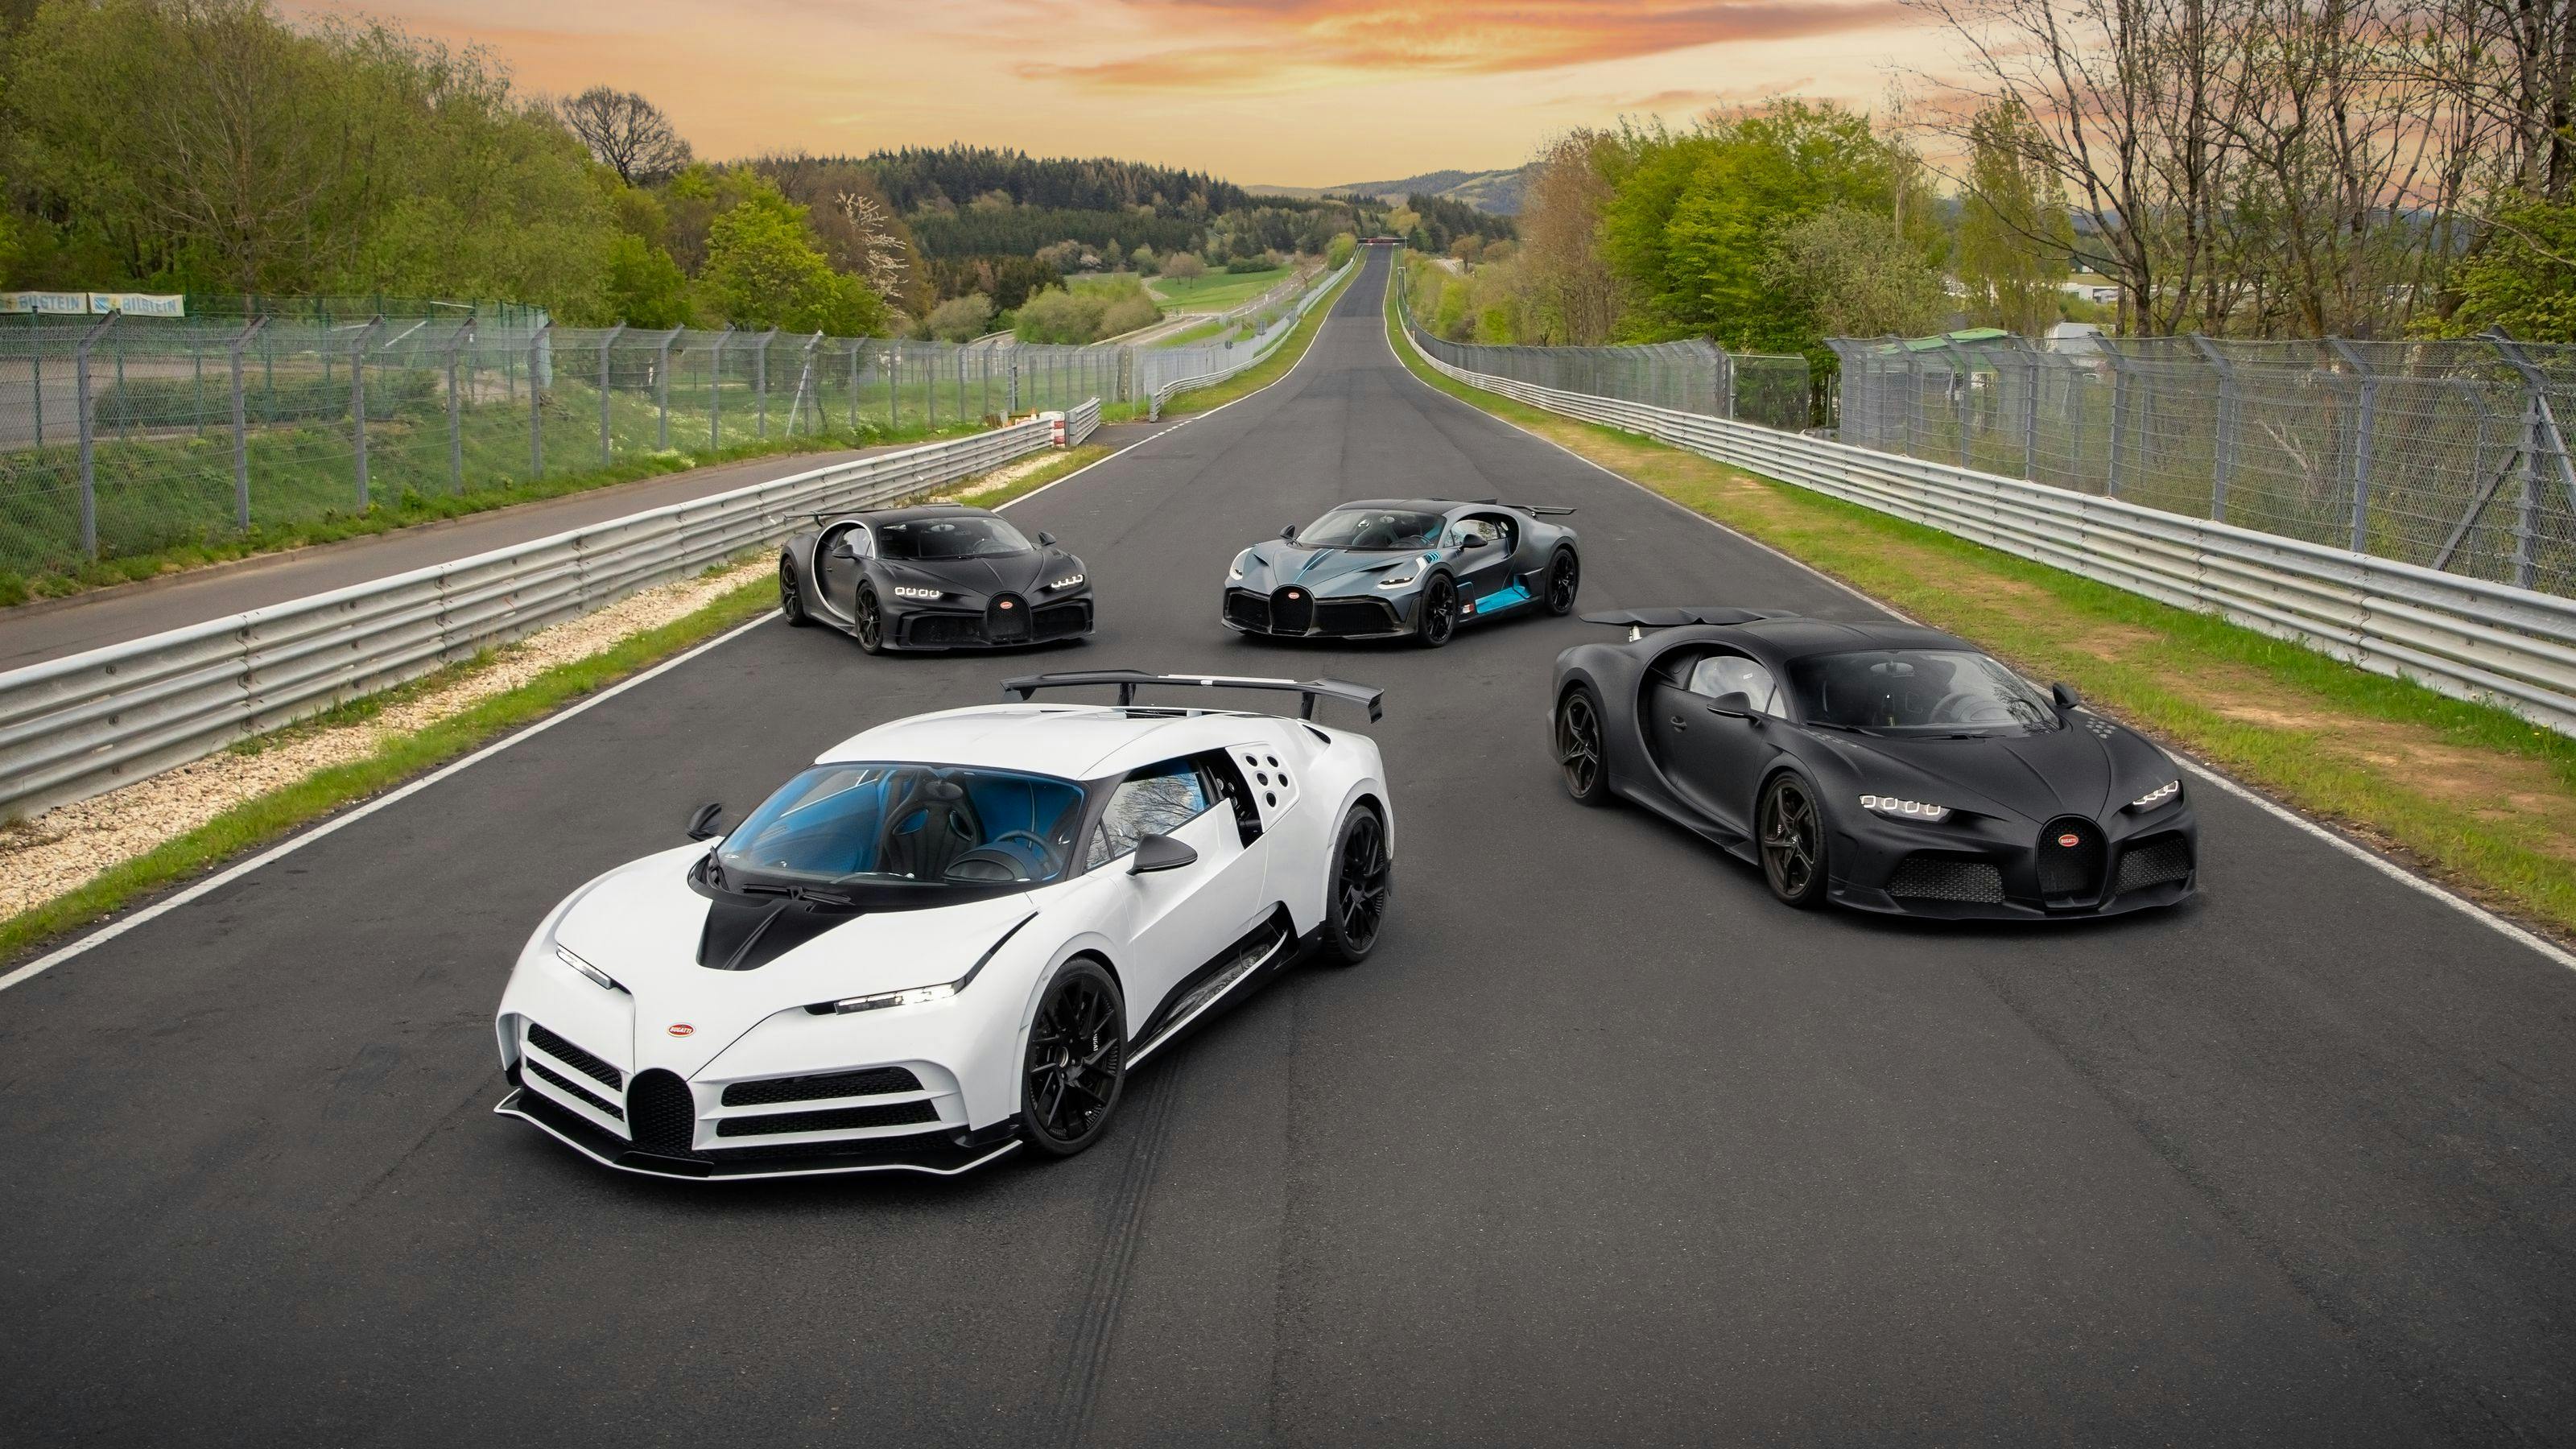 Bugatti Takes the World’s Most Exclusive Development Lineup to the Nürburgring